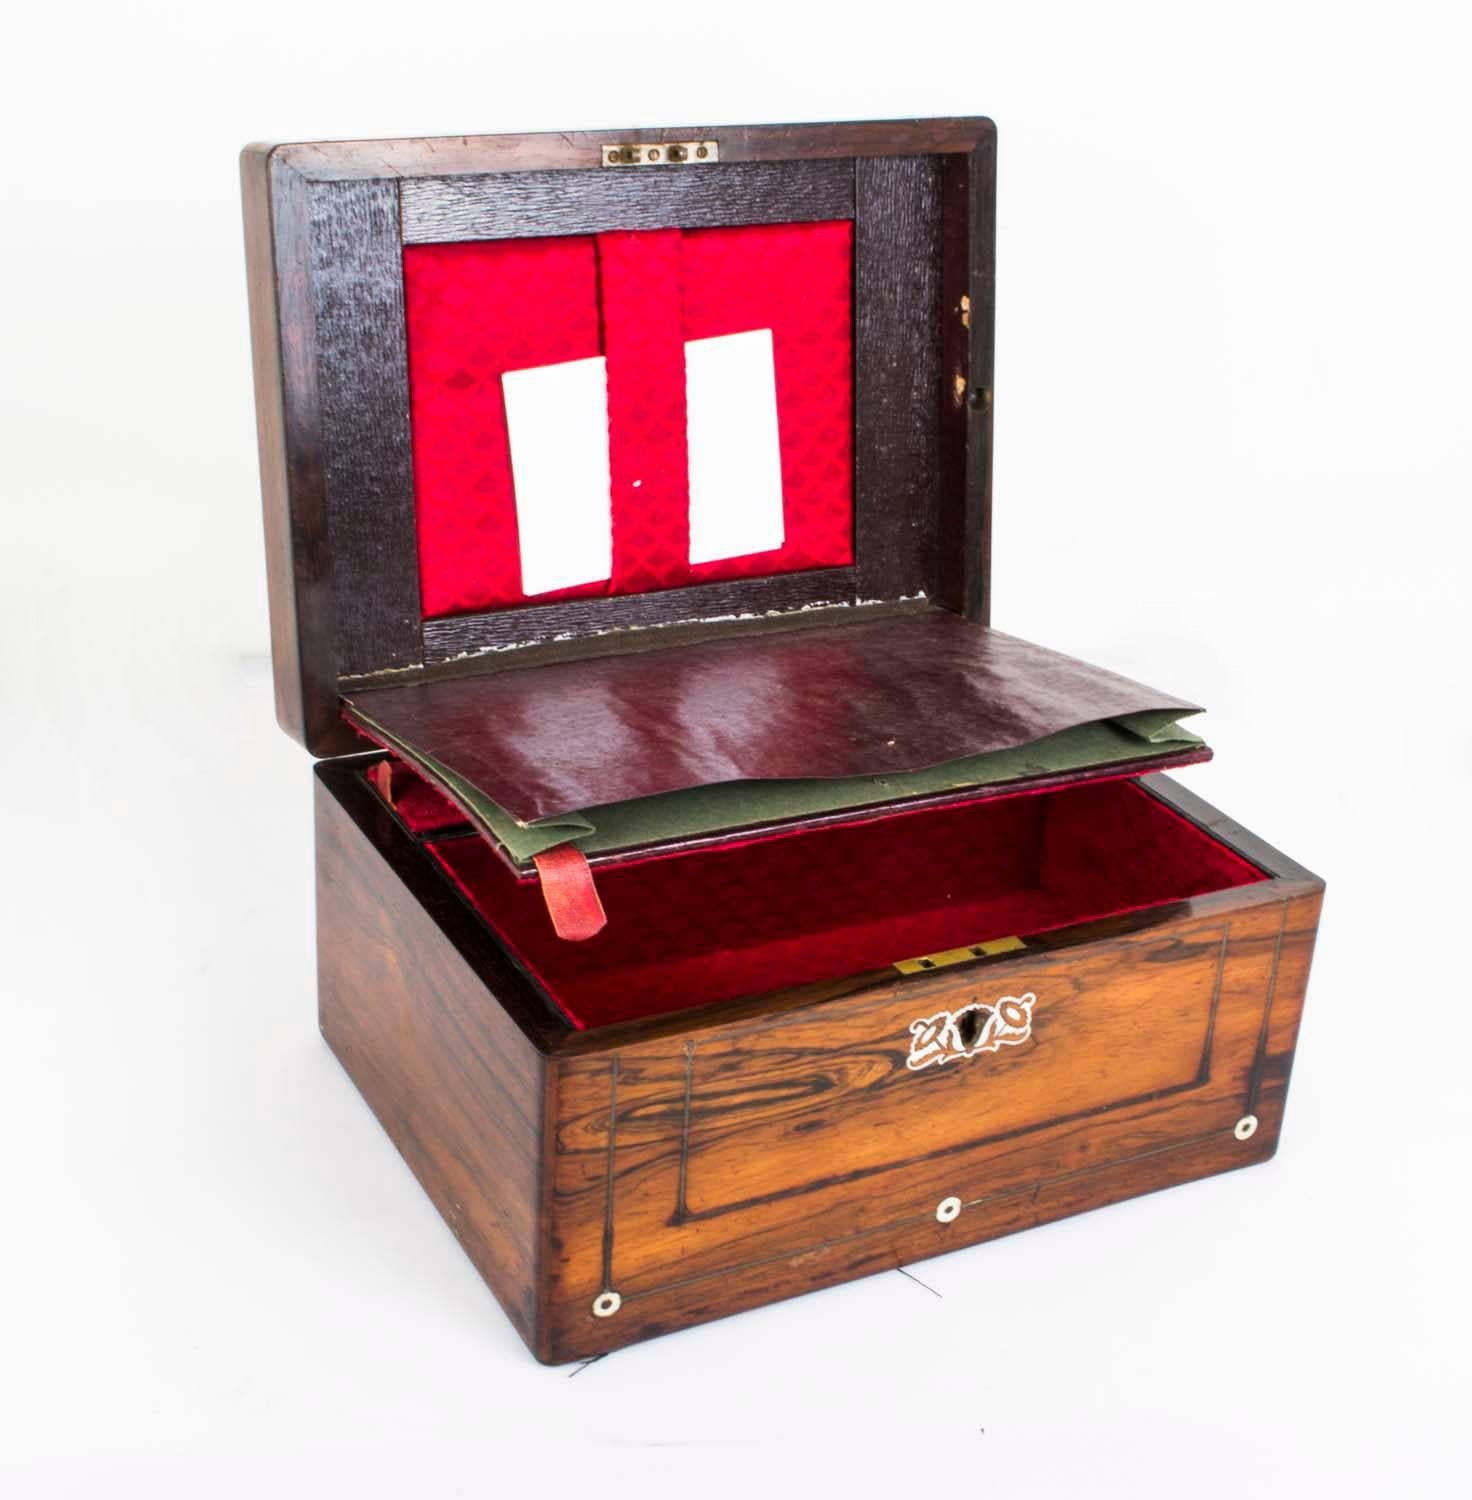 This is a wonderful antique rosewood jewelry box, with mother of pearl and brass inlaid decoration, circa 1840. 

There is a hinged lid which reveals interiors lined with elegant patterned burgundy velvet. The casket has also a separate